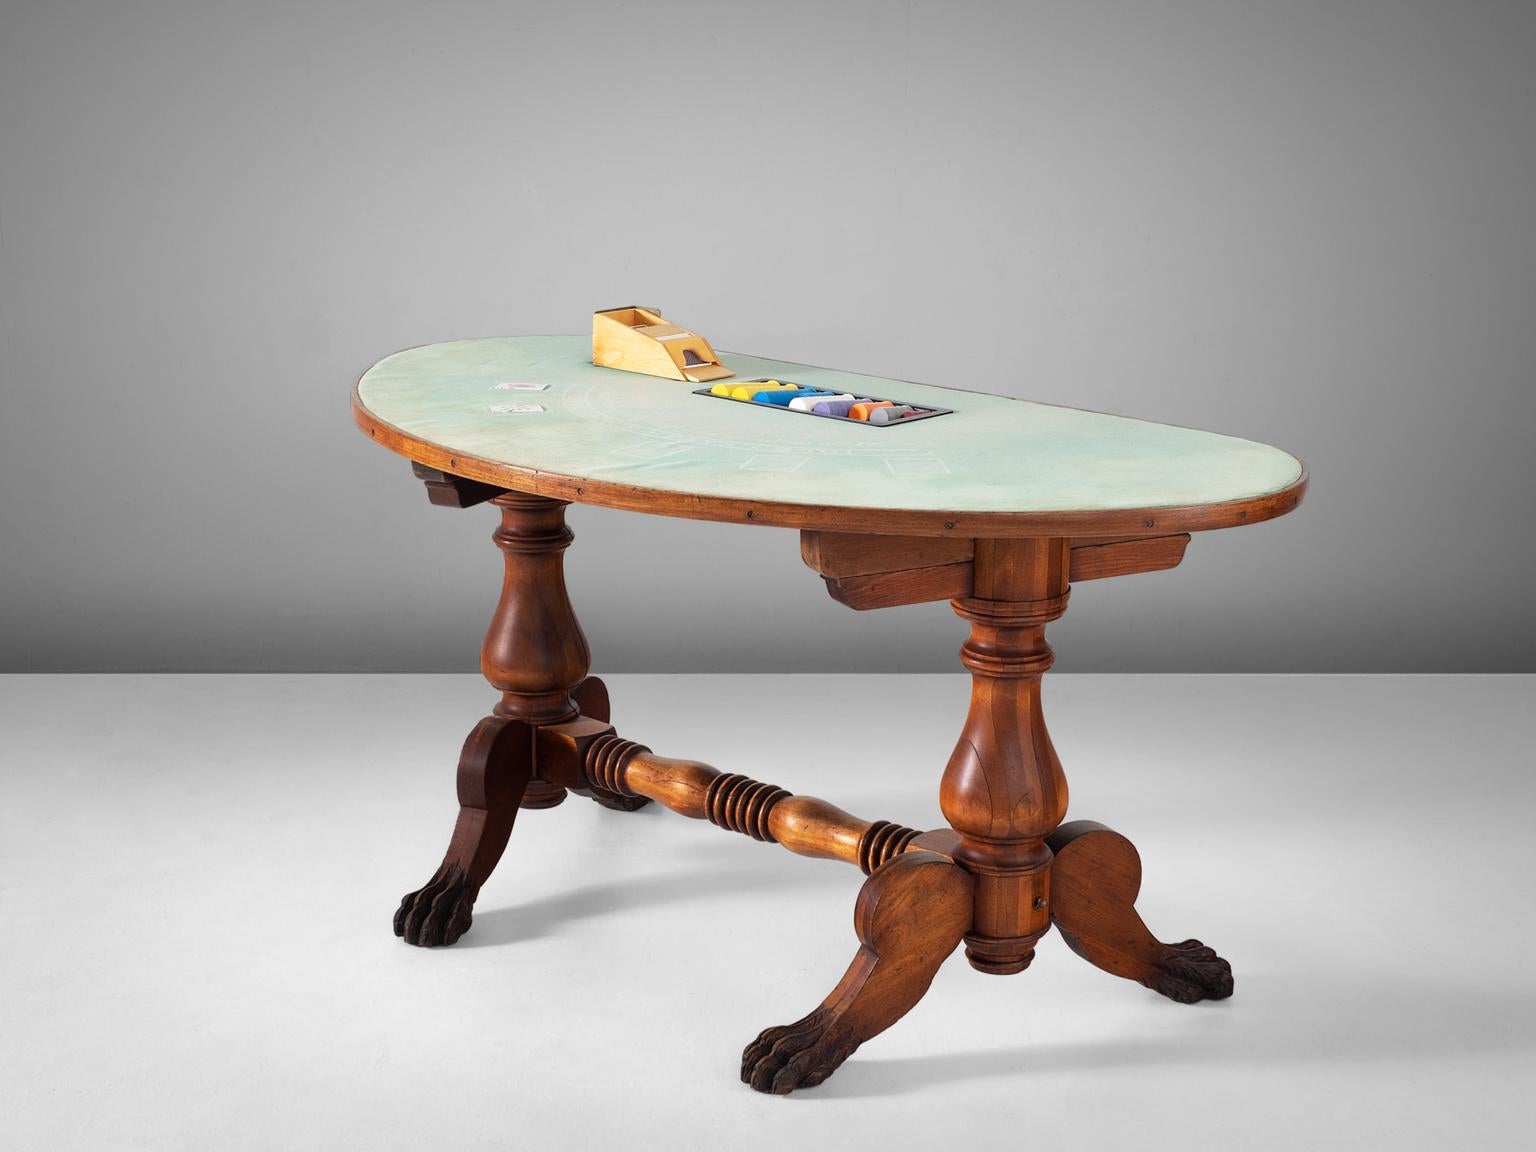 Game table, in mahogany, brass and fabric, United States, 1940s. 

A beautiful antique American mahogany blackjack table in its original condition. Complete with original cardholder. The wooden frame is highly detailed and shows great craftsmanship.